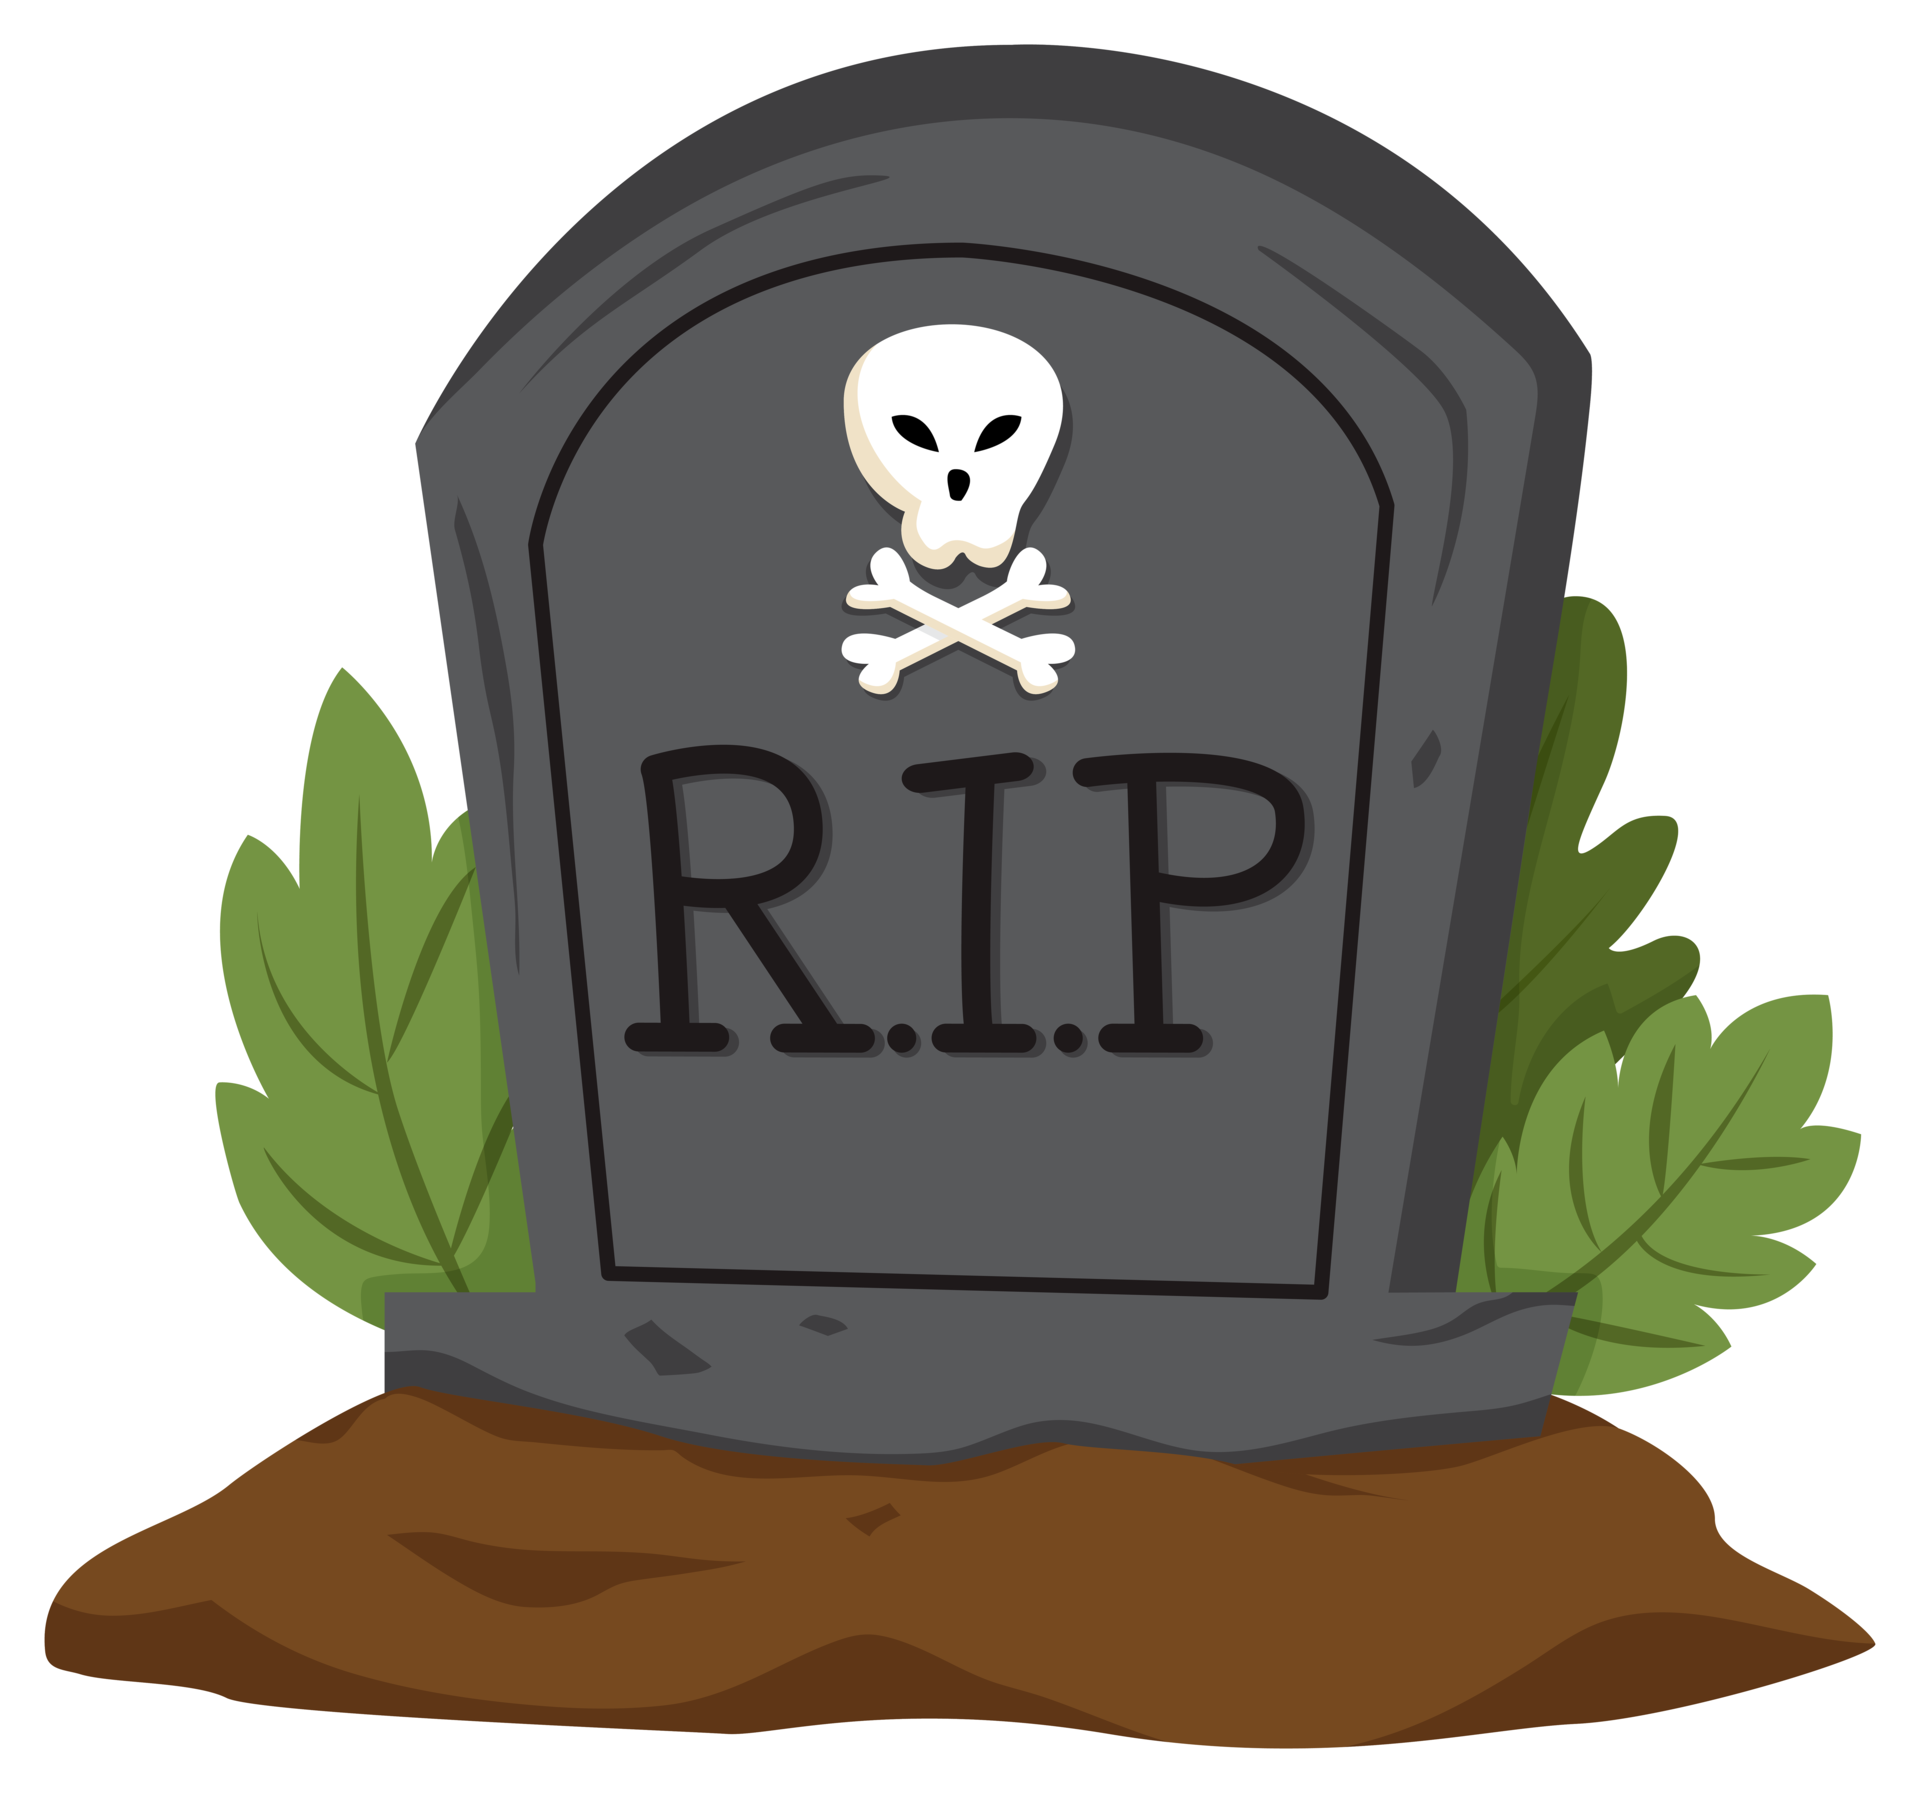 Rip png images